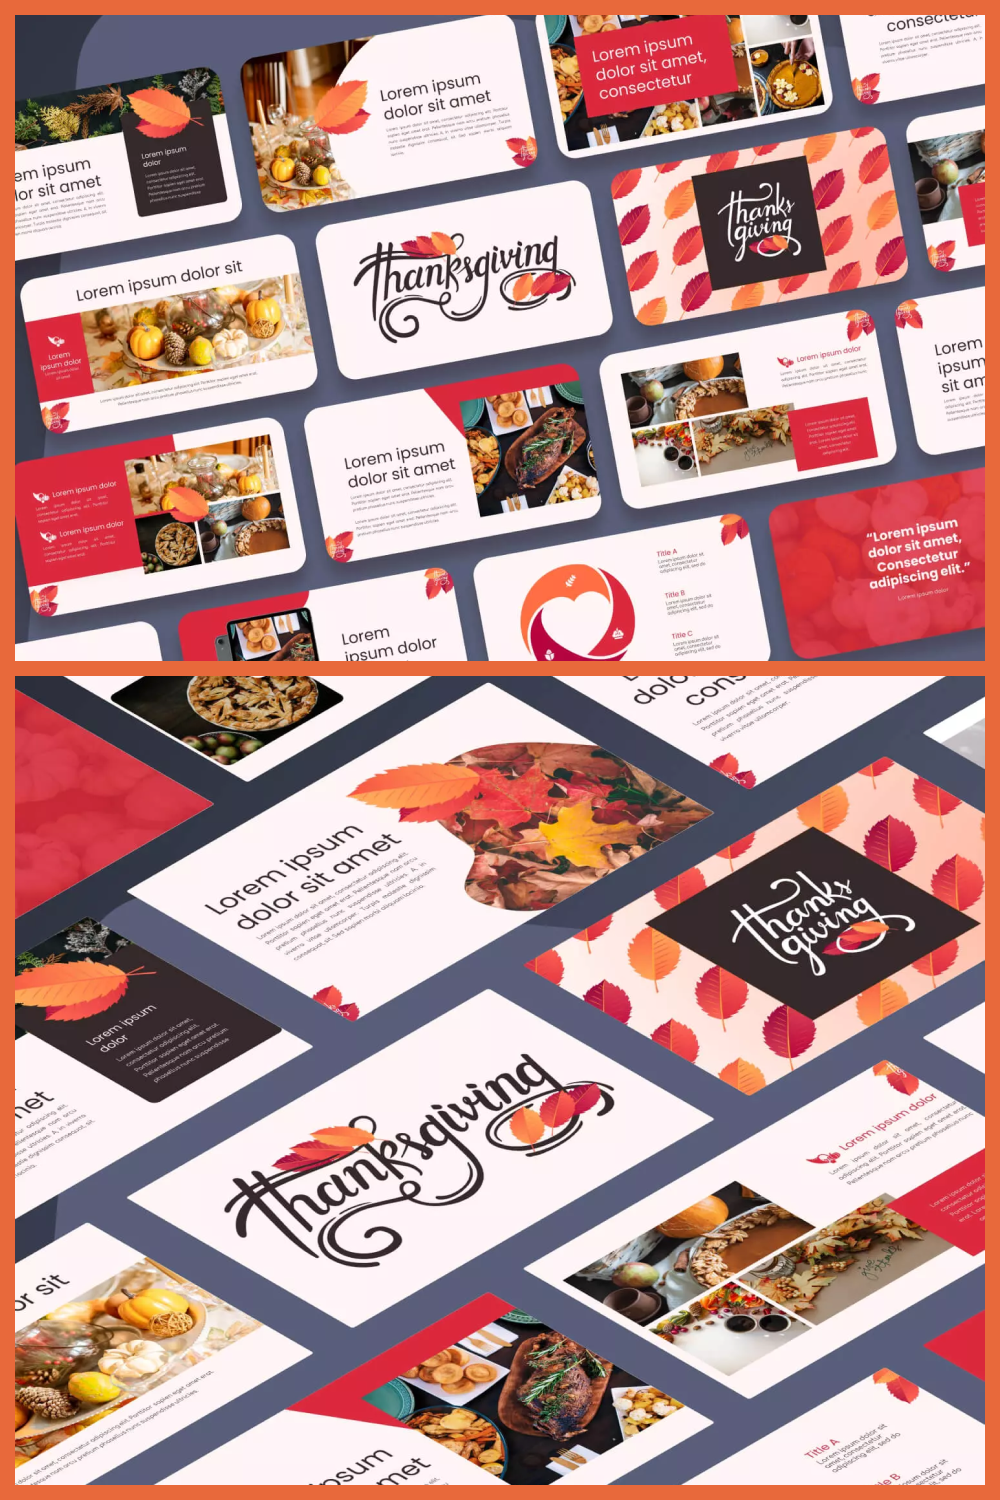 Collage of screenshots of presentation pages with white and red elements and photos of food.